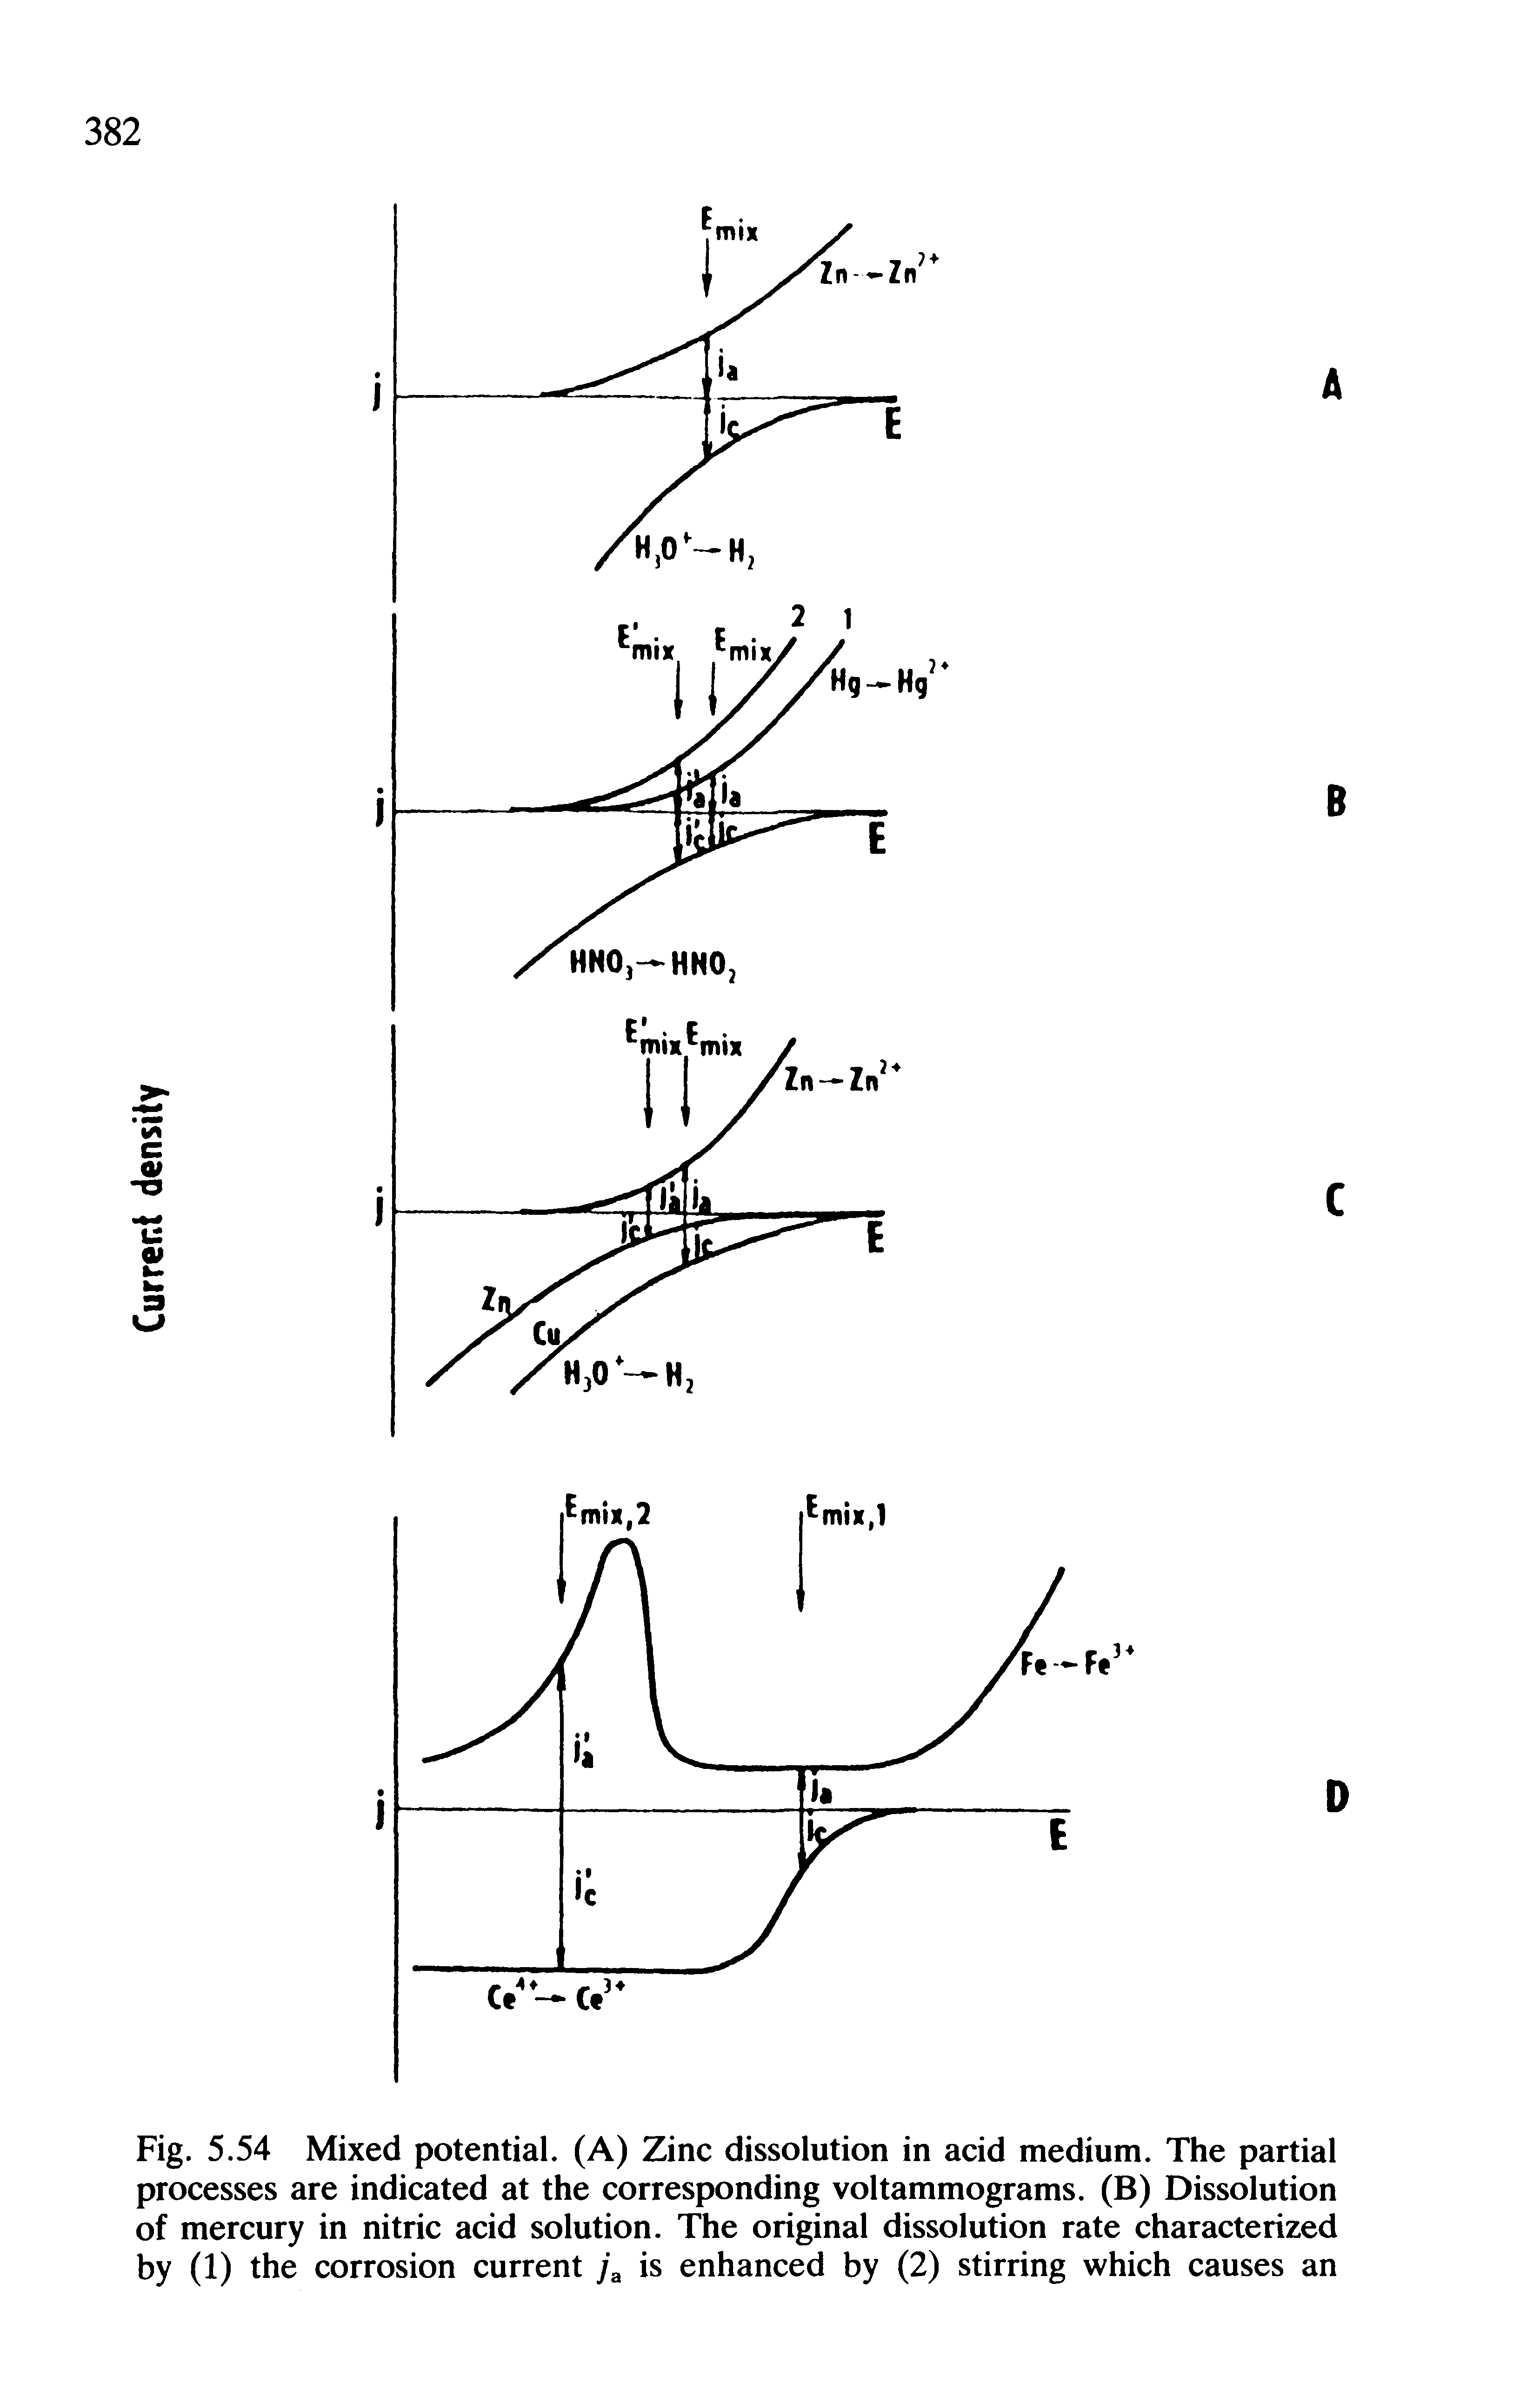 Fig. 5.54 Mixed potential. (A) Zinc dissolution in acid medium. The partial processes are indicated at the corresponding voltammograms. (B) Dissolution of mercury in nitric acid solution. The original dissolution rate characterized by (1) the corrosion current y a is enhanced by (2) stirring which causes an...